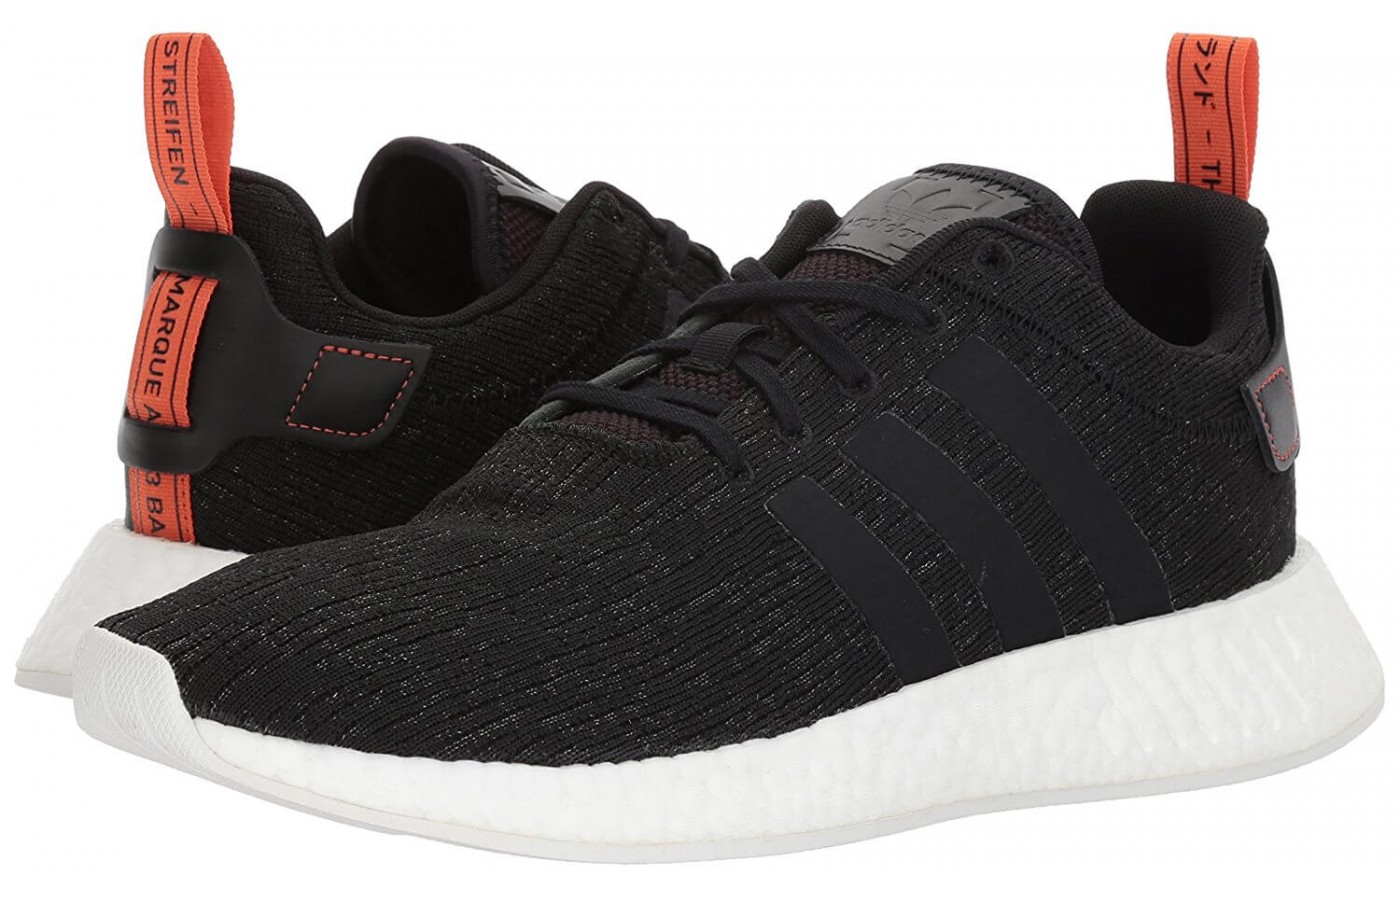 The Adidas NMD R2 is lightweight and responsive 